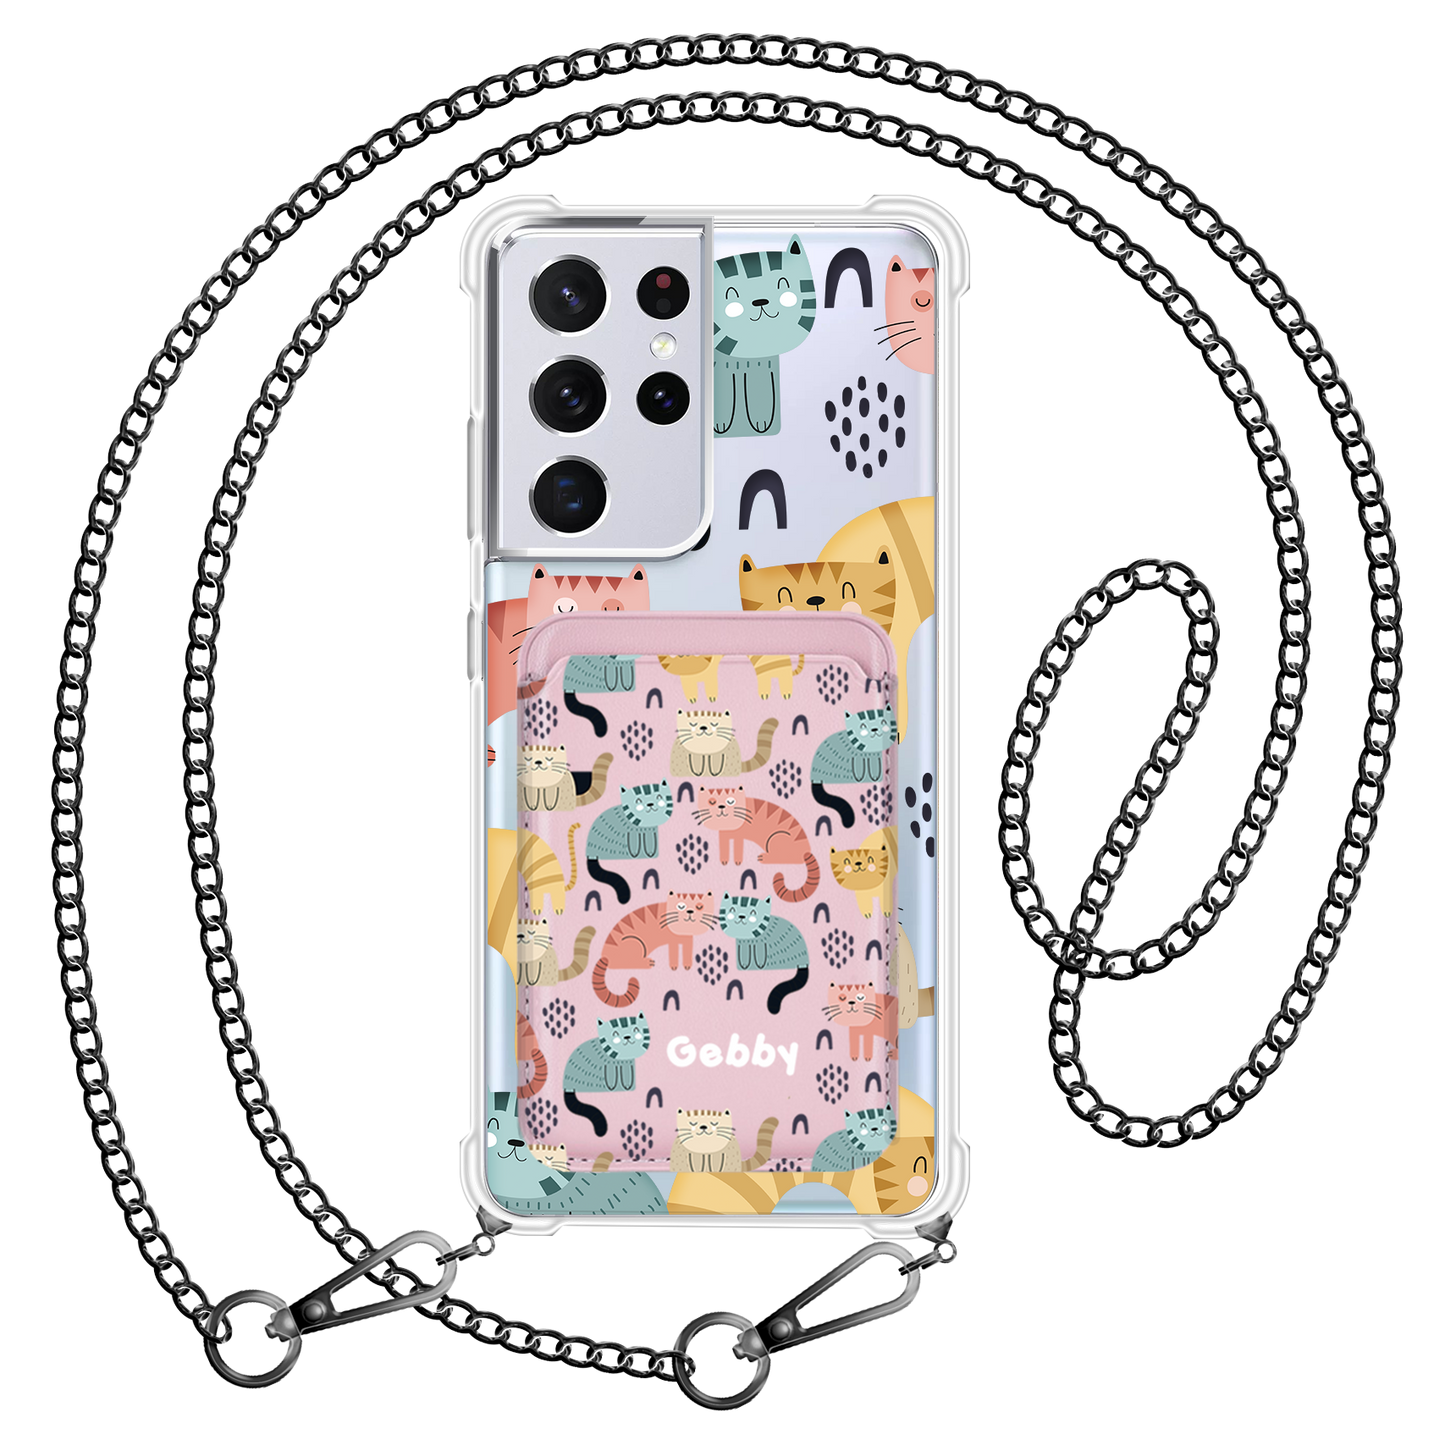 Android Magnetic Wallet Case - Rainbow Meow 1.0